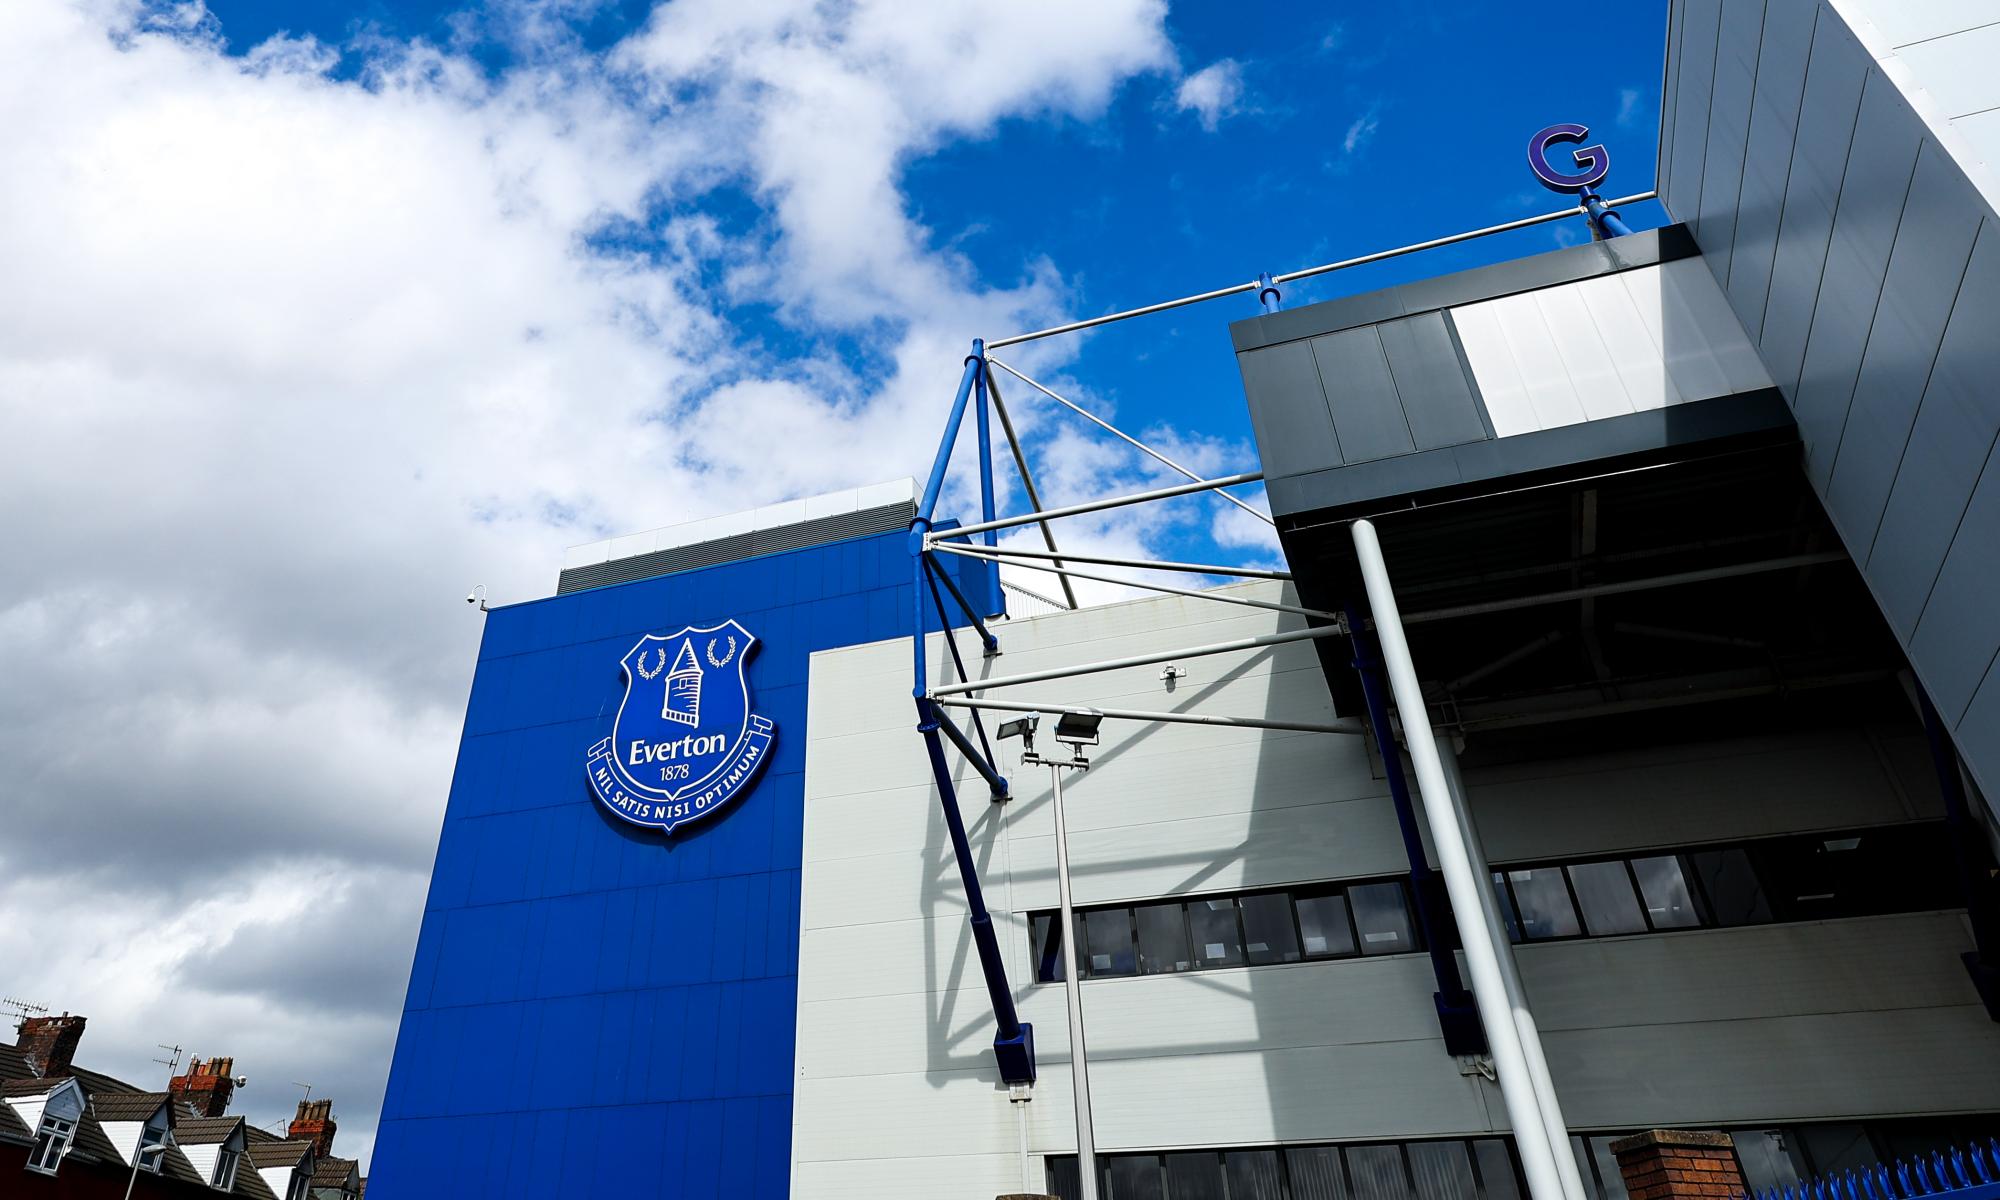 premier league aim to have everton’s latest appeal heard before final day